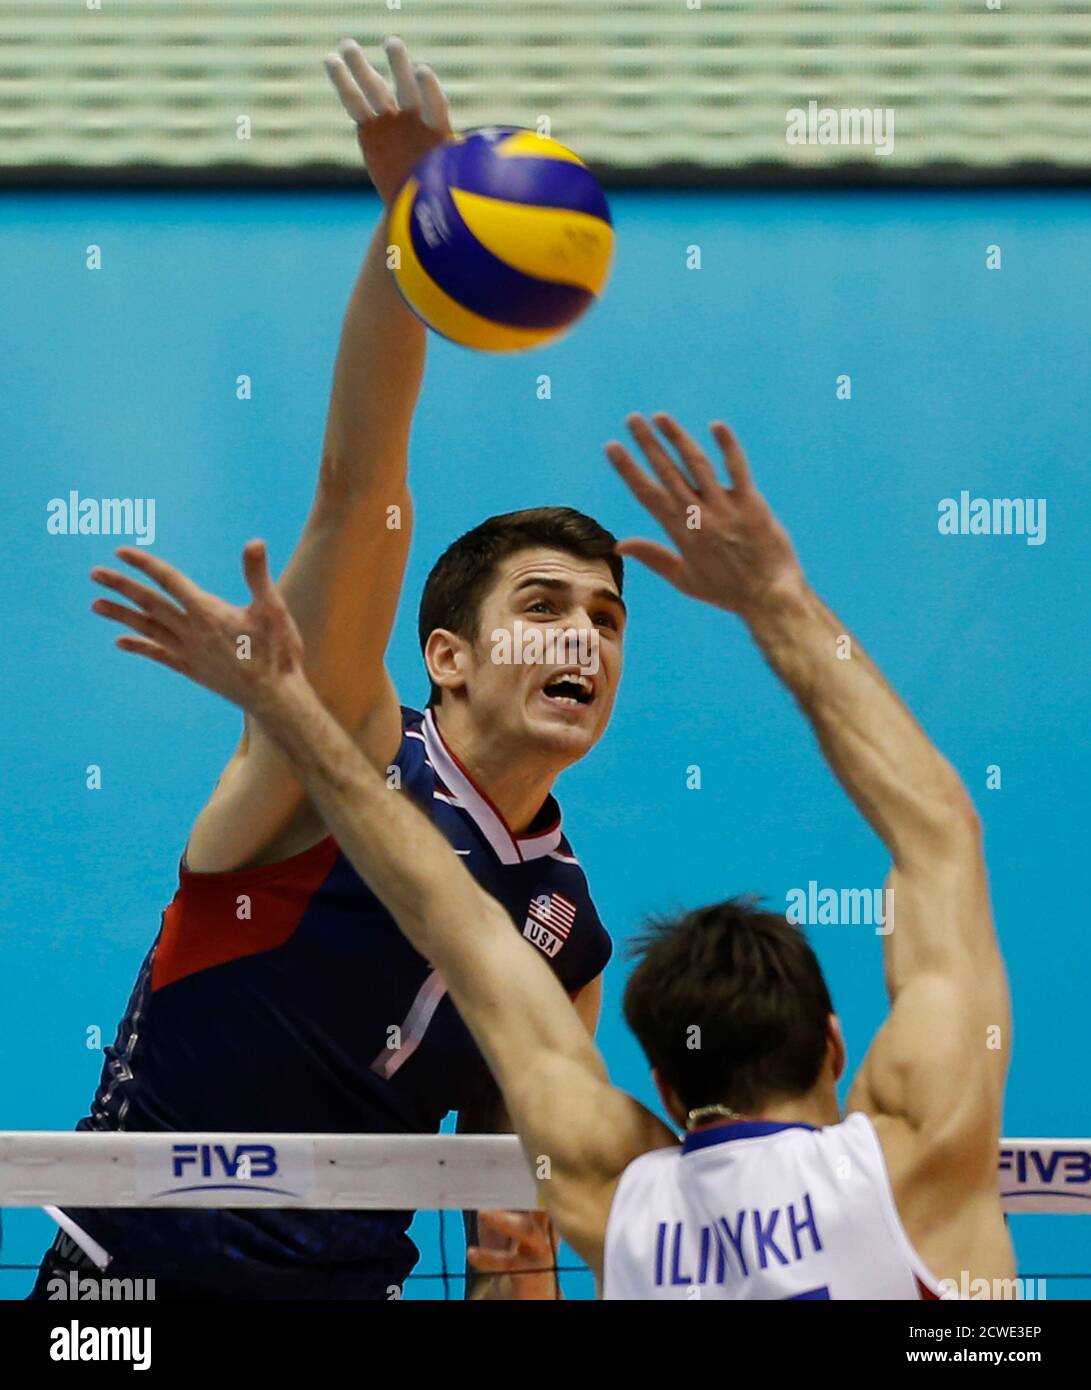 Matthew Anderson of the U.S. spikes the ball against Dmitriy Ilinykh of  Russia on the final day of their FIVB Men's Volleyball World Grand  Champions Cup 2013 in Tokyo November 24, 2013.